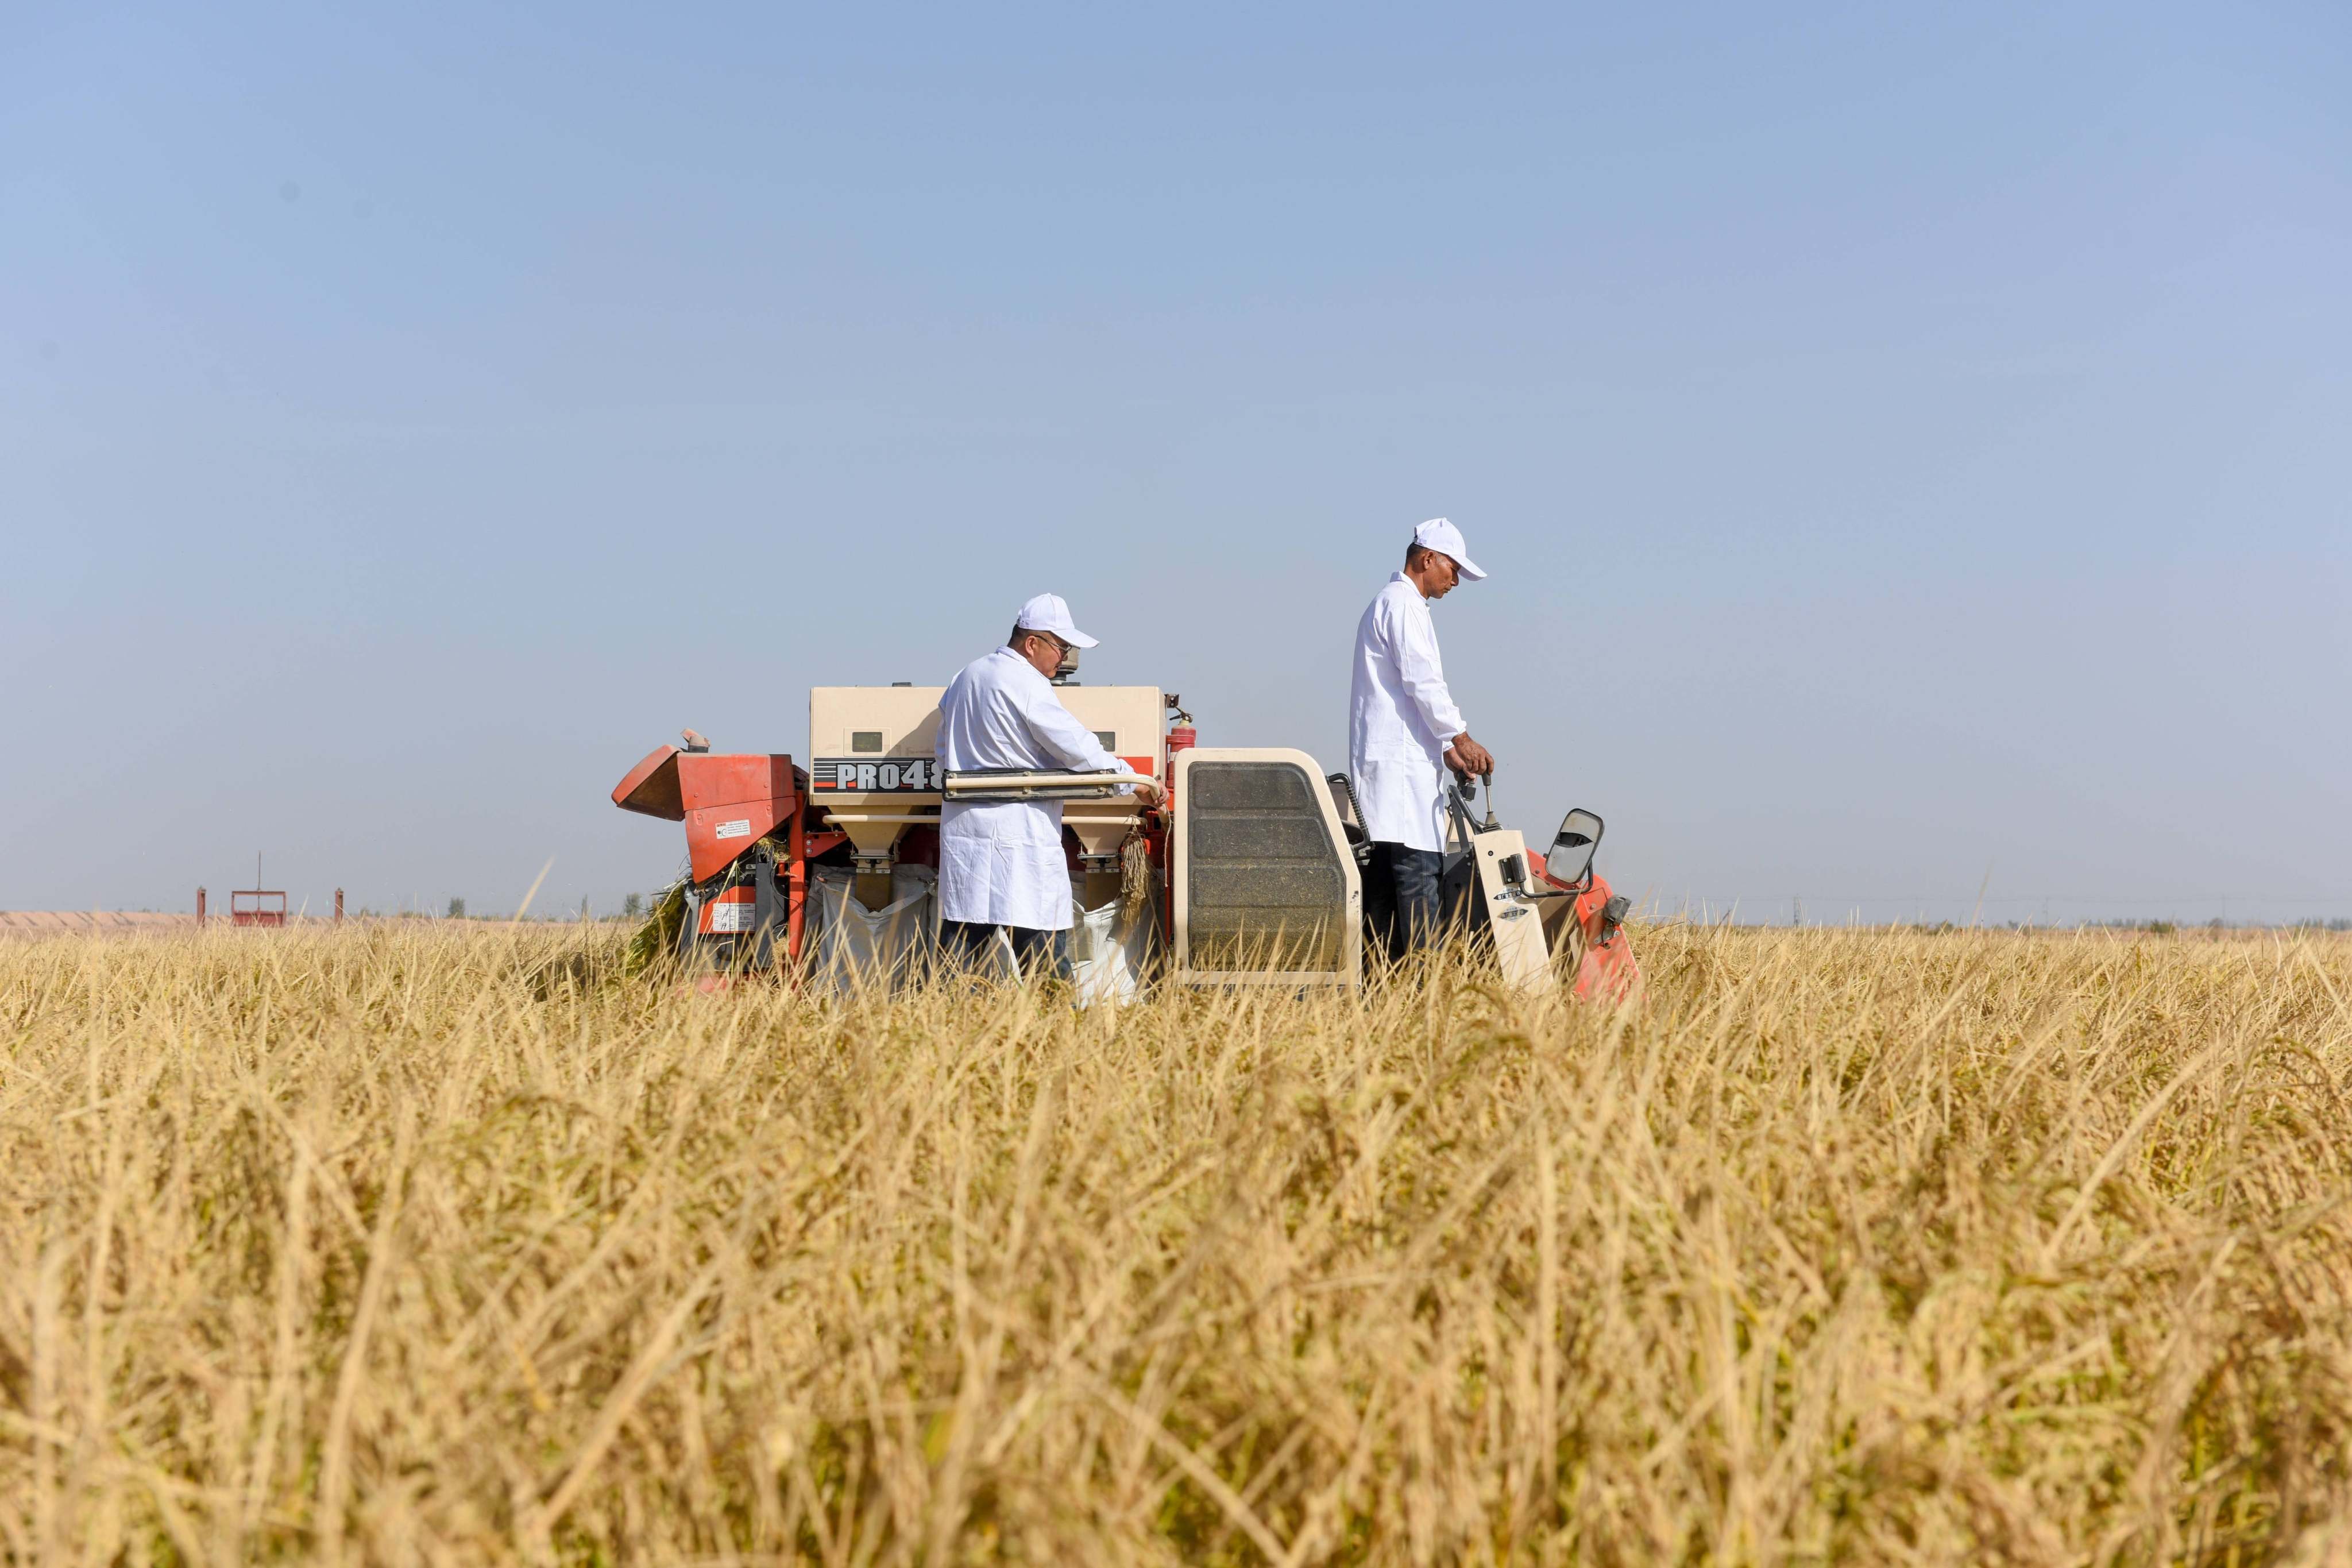 China’s agricultural monitoring system CropWatch is now helping more than 160 countries around the world better deal with market fluctuations as they strive to achieve zero hunger. Photo: Xinhua